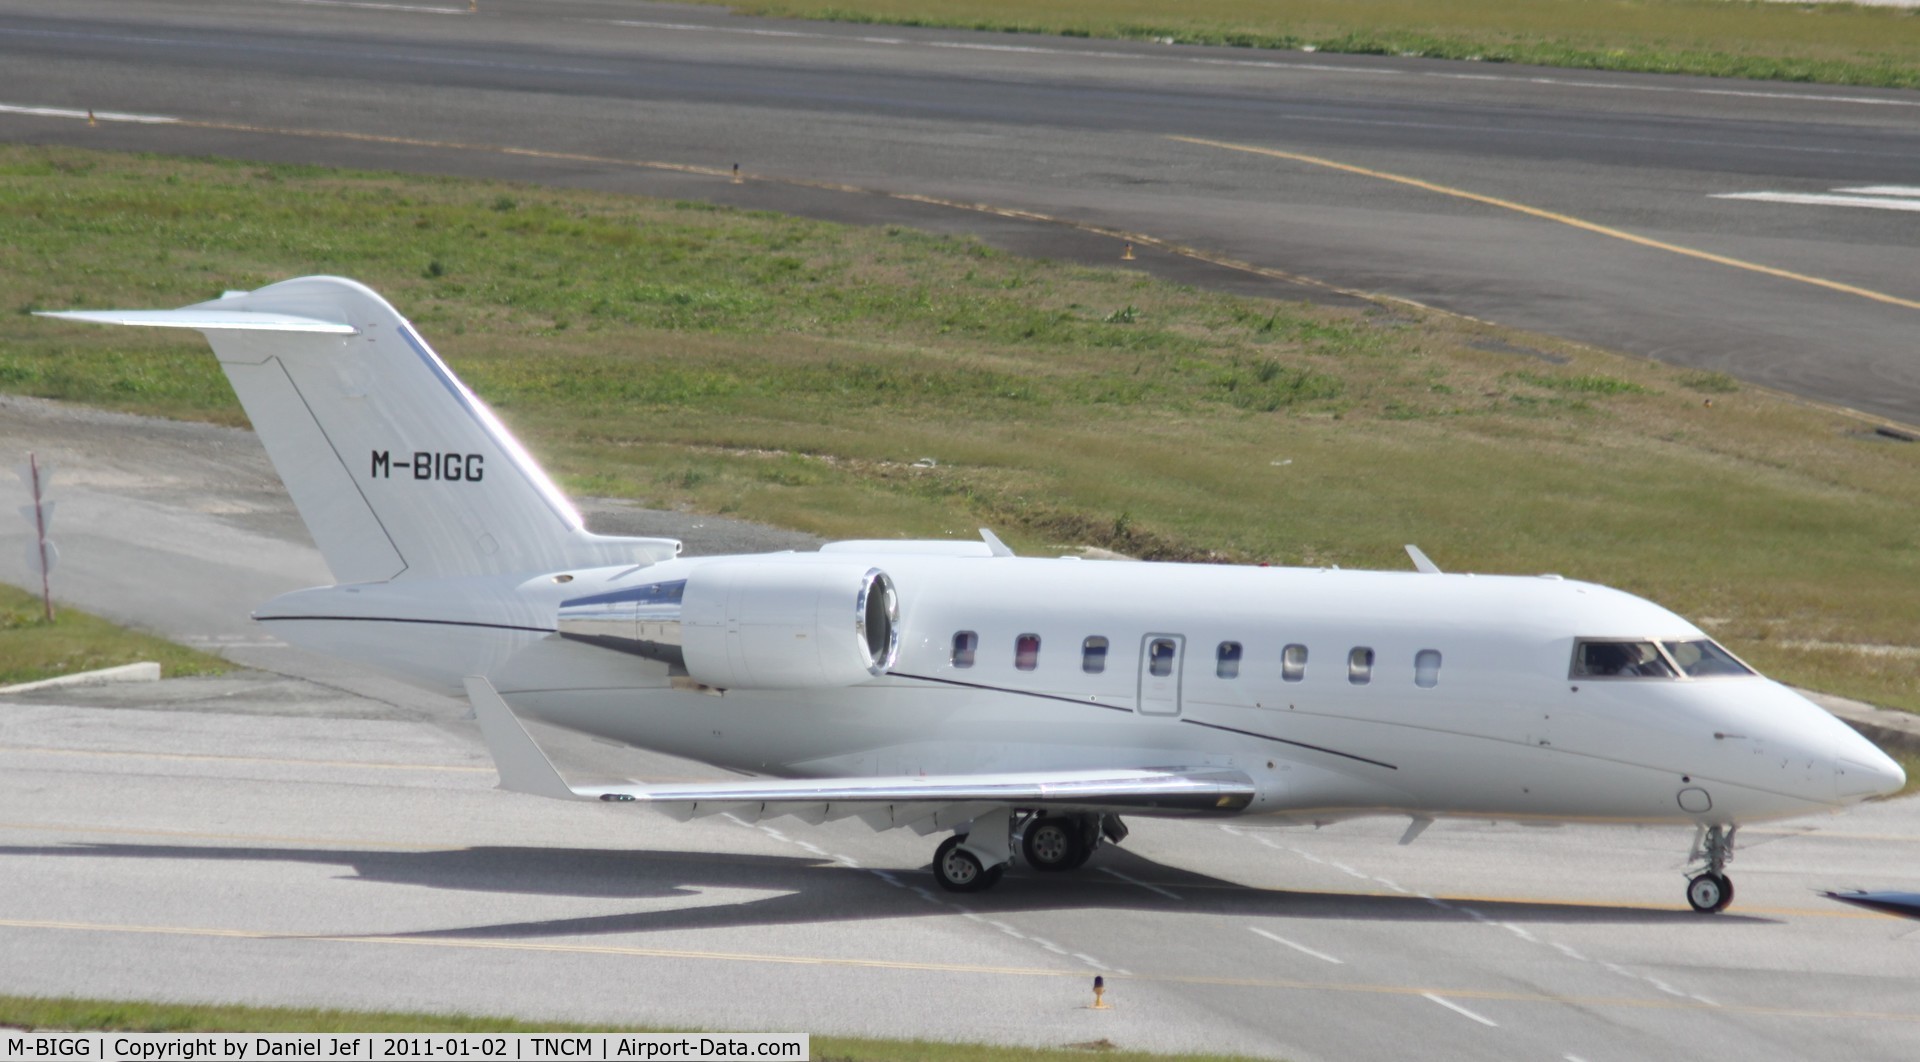 M-BIGG, 2007 Bombardier Challenger 605 (CL-600-2B16) C/N 5722, M-BIGG taxing for take off at TNCM